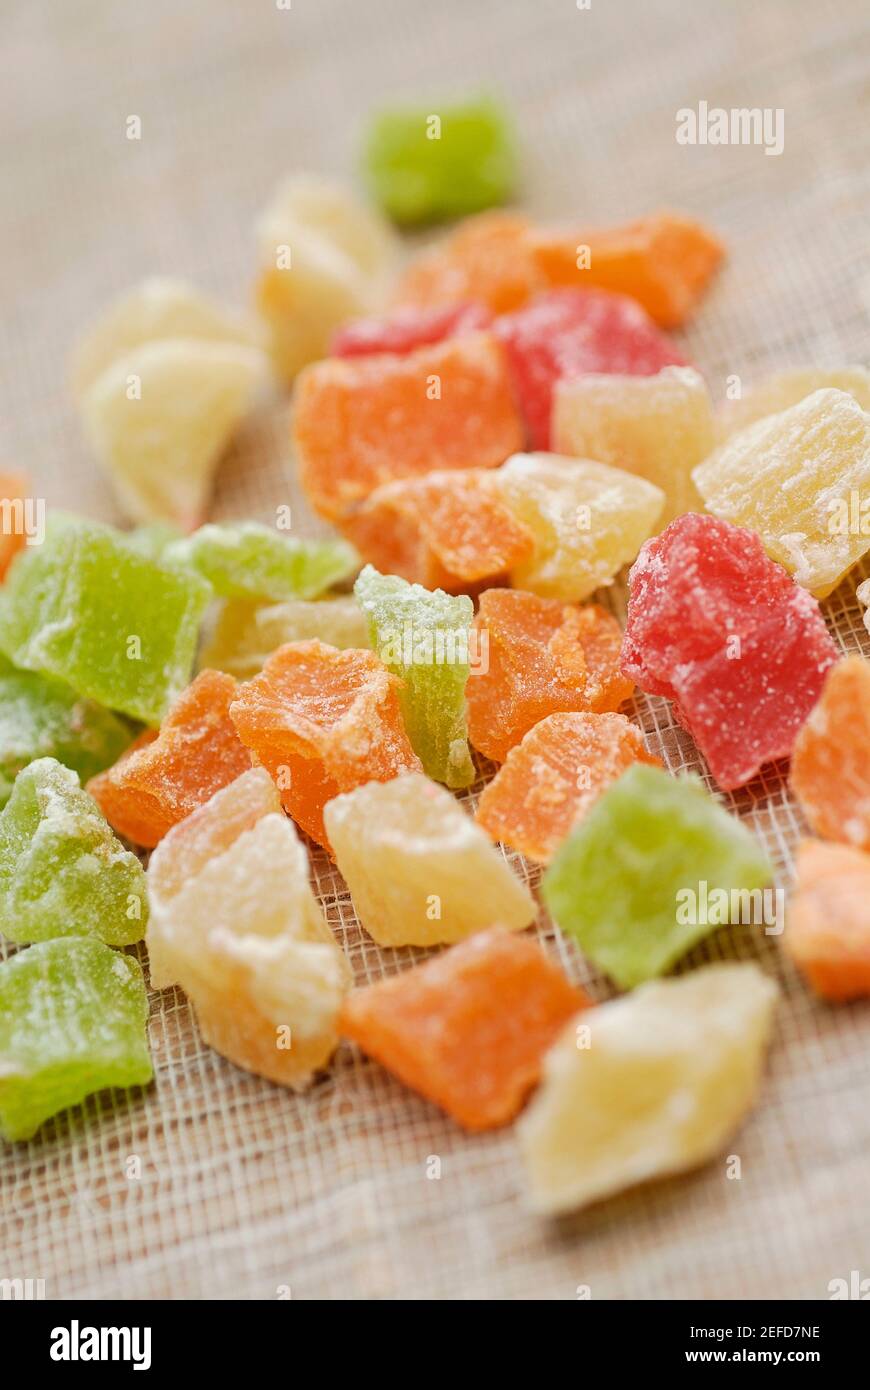 Close up of sugared candy Stock Photo